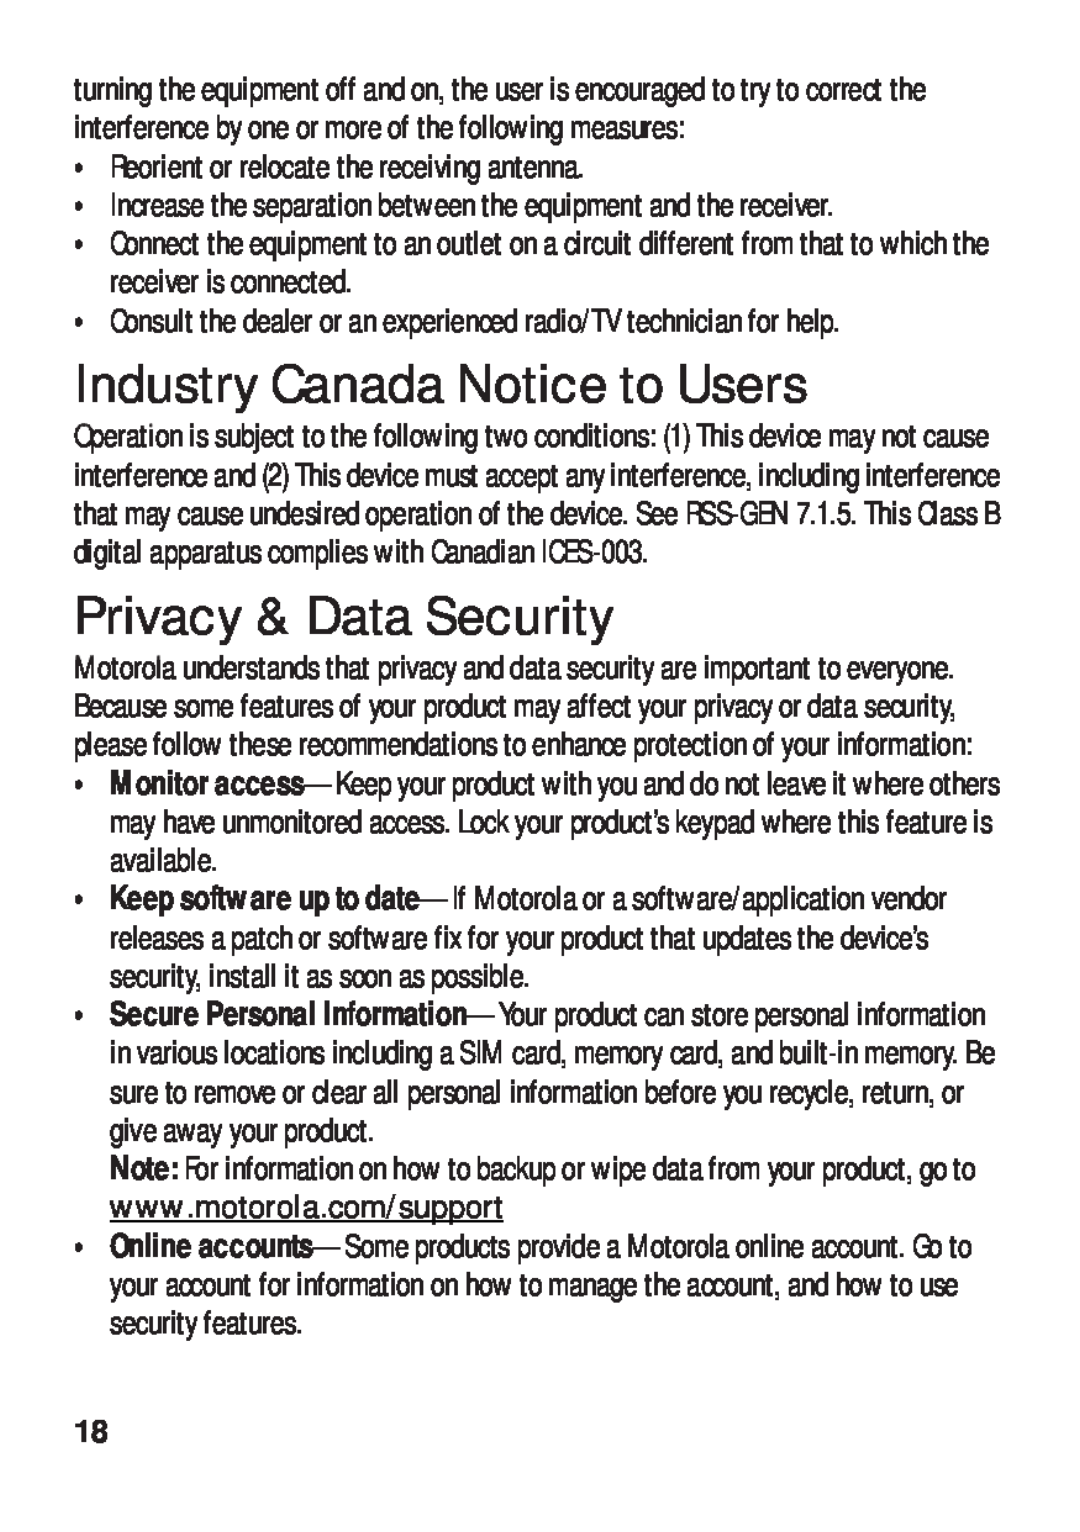 Motorola TX500 manual Industry Canada Notice to Users, Privacy & Data Security, Reorient or relocate the receiving antenna 